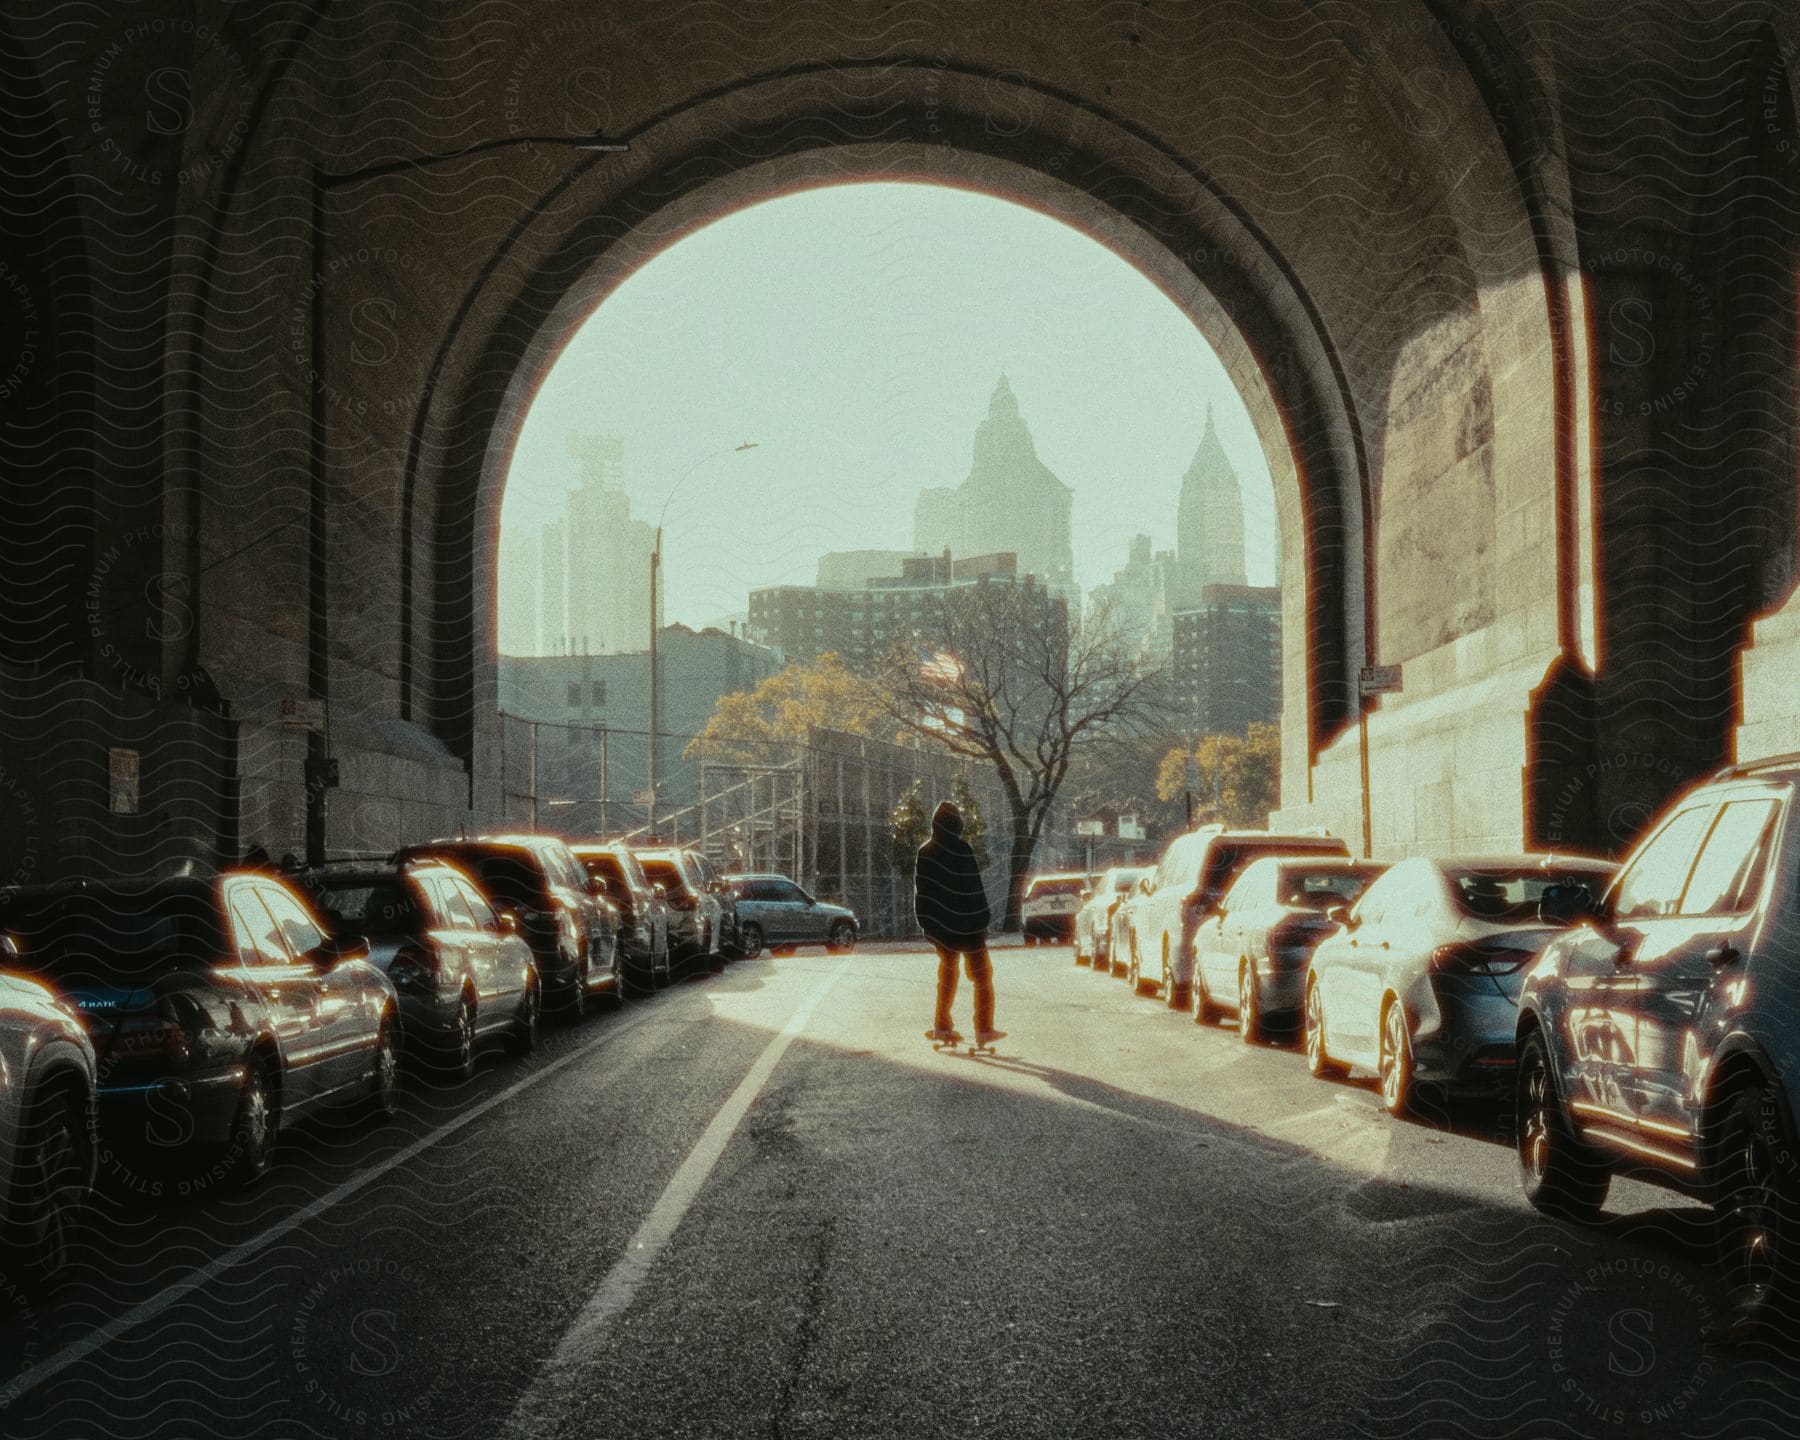 Person in a hoodie on top of a skateboard inside a tunnel with parked cars on the sides and a city with tall buildings in the background.